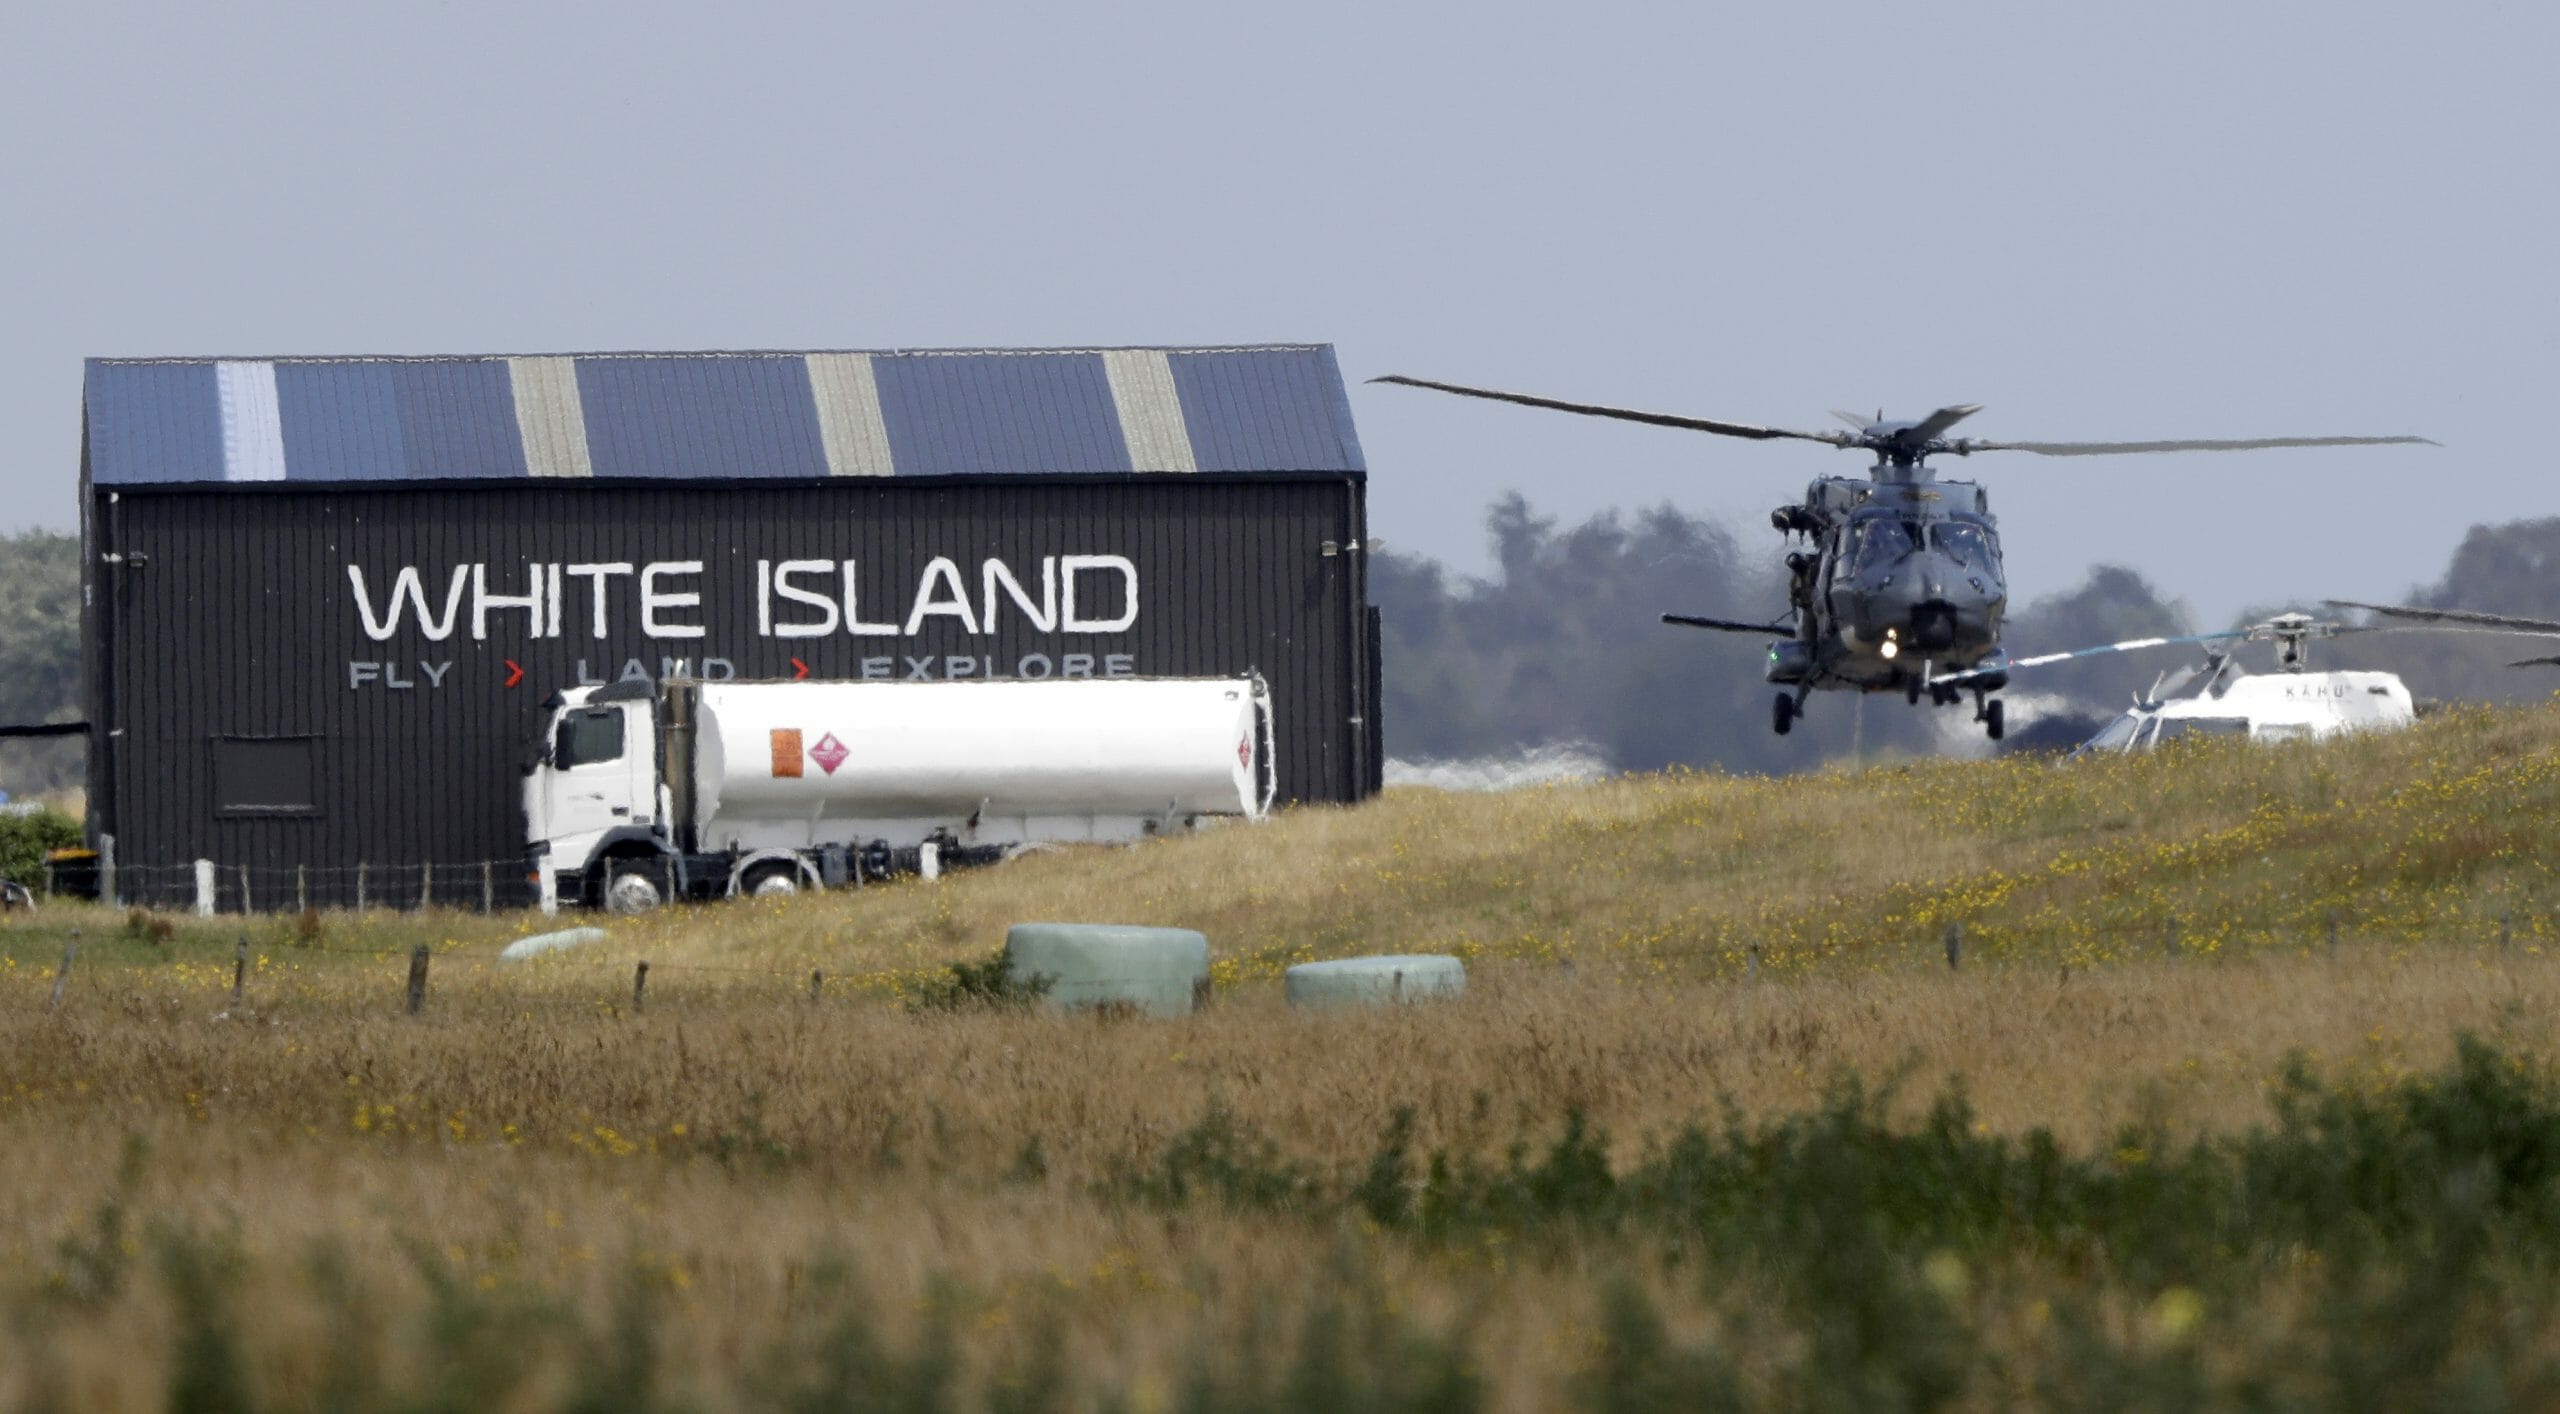 A Navy helicopter returns to Whakatane Airport following the recovery operation to return the victims of the Dec. 9 volcano eruption continues off the coast of Whakatane New Zealand, Friday, Dec. 13, 2019.